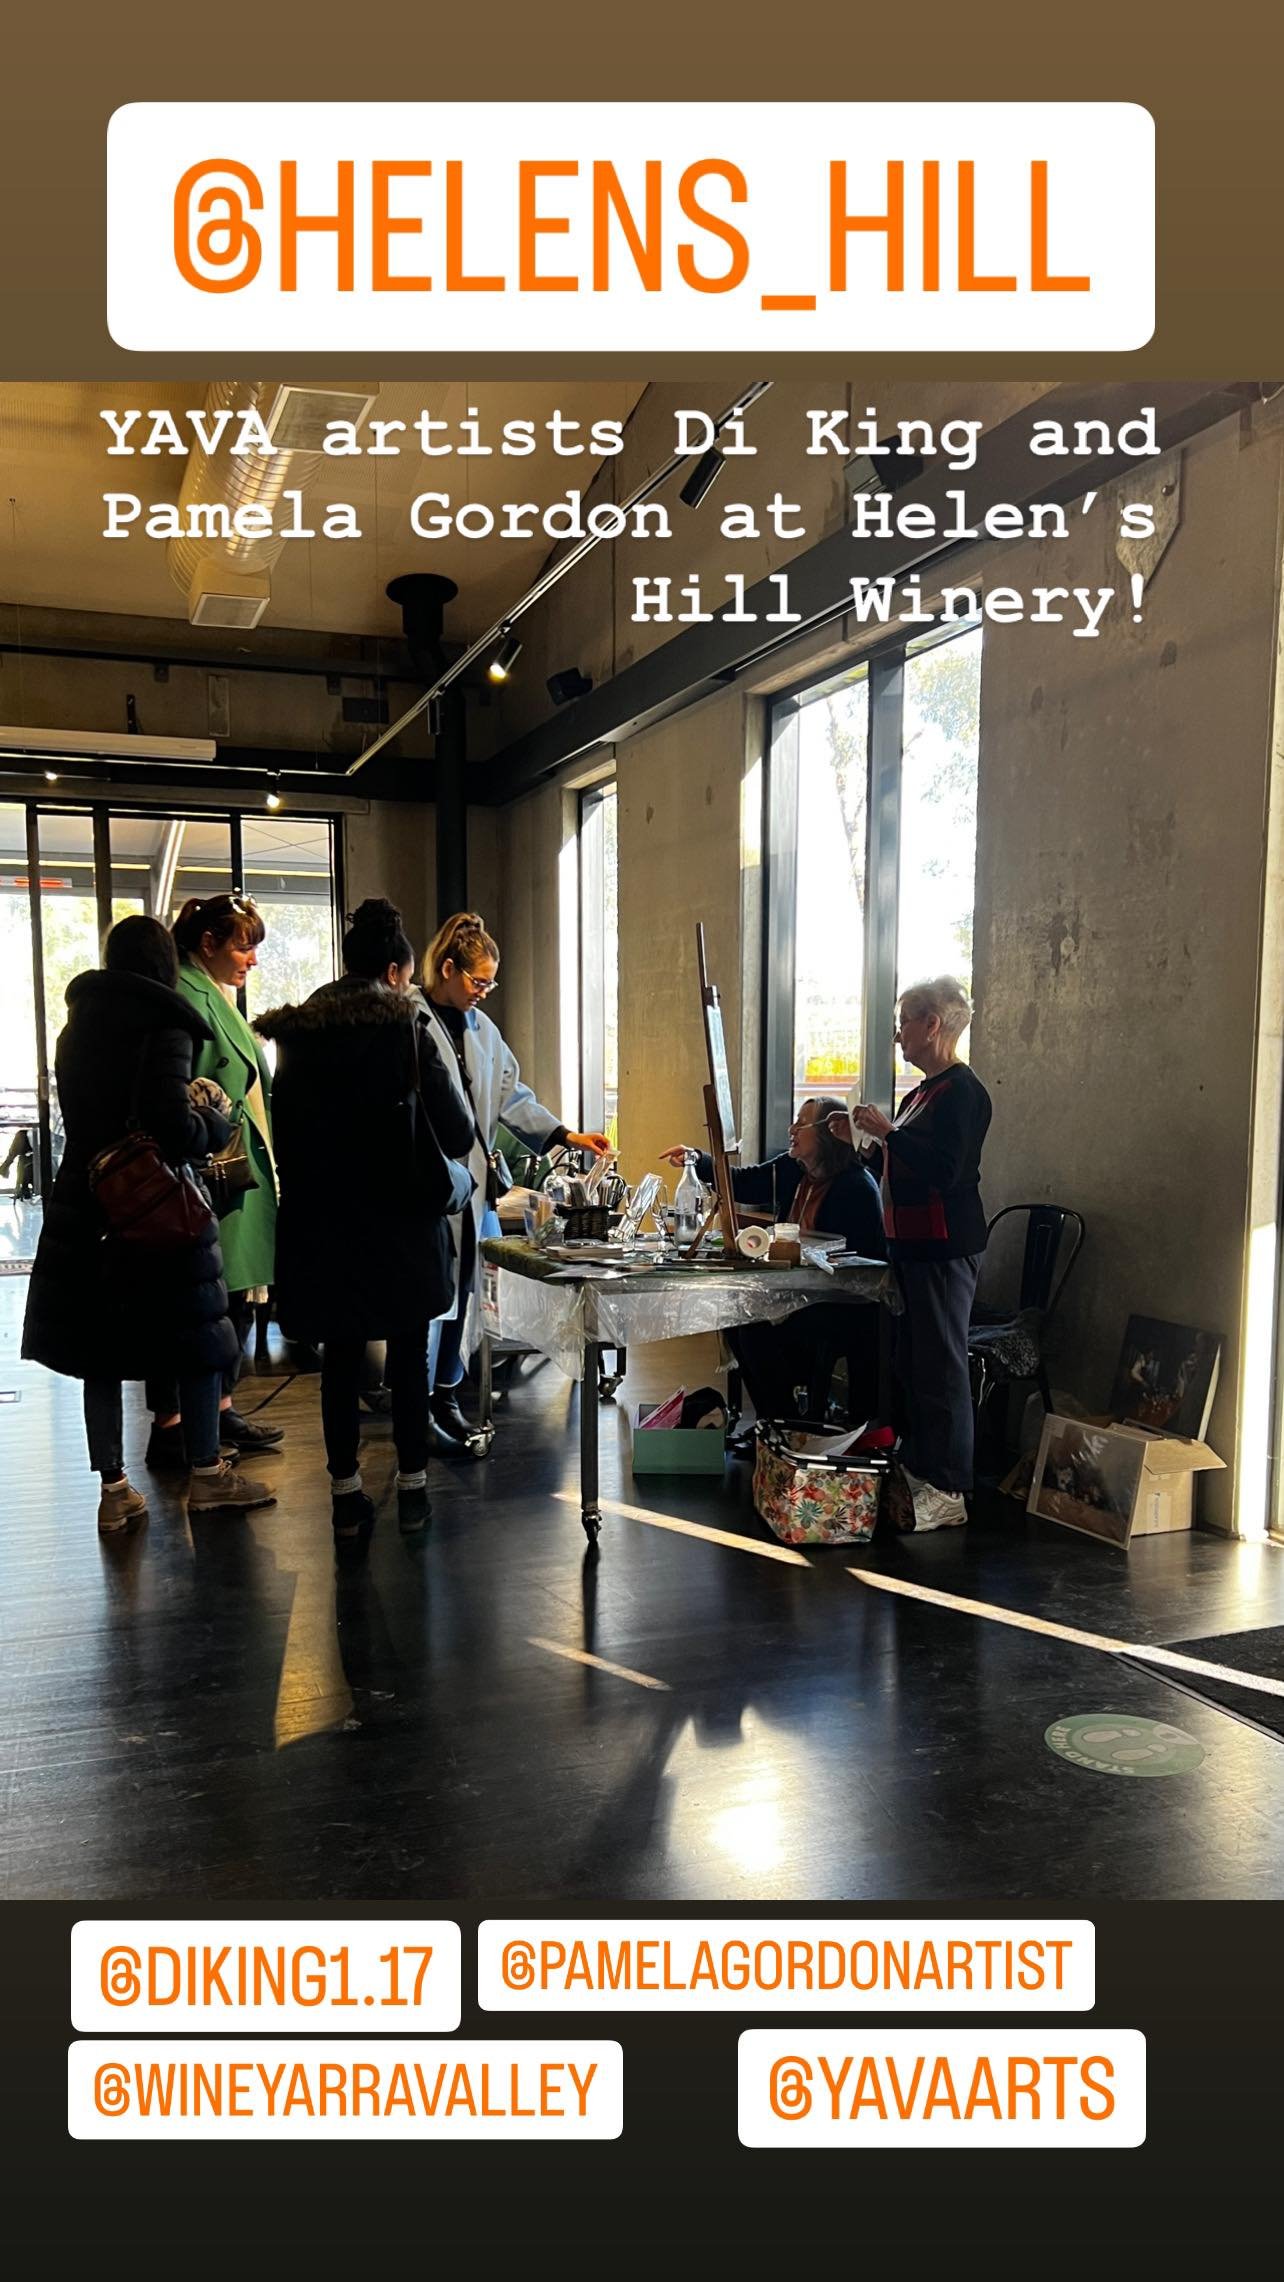 Insta Story - Di King and PAmela Gordon chatting with visitors at Helen's Hill